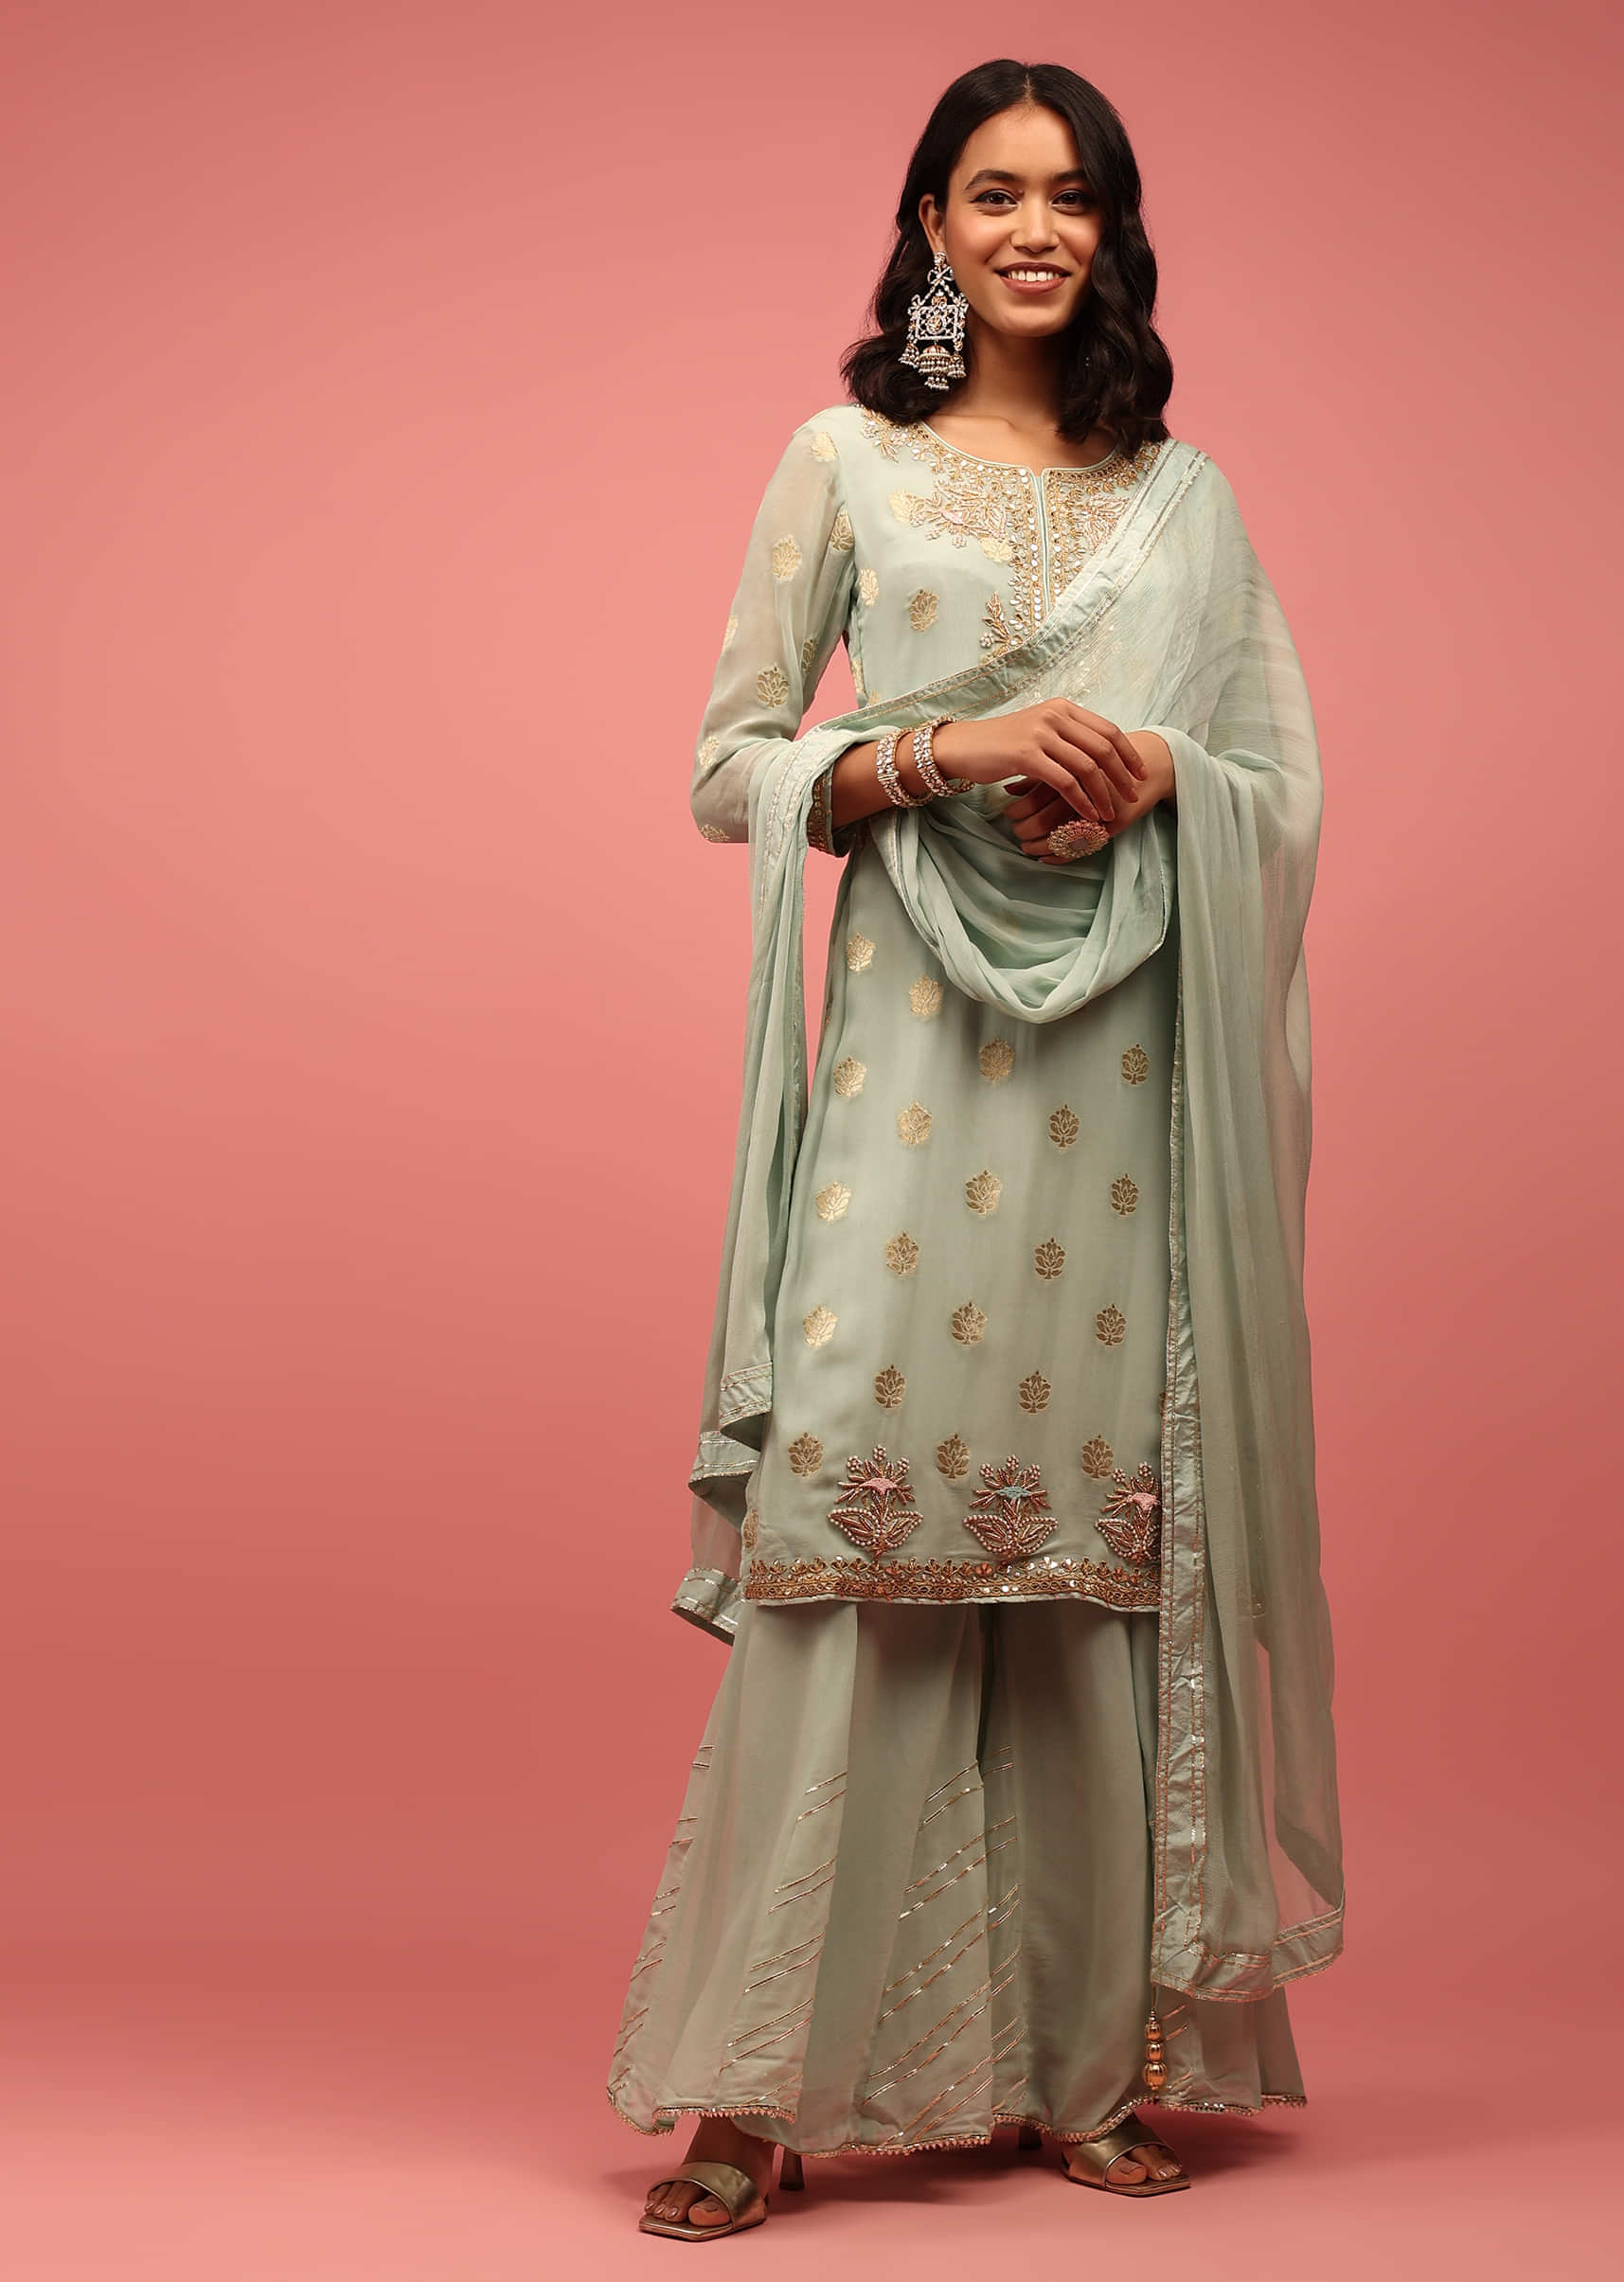 Green Palazzo Suit Set In Hand-Embellished Banarasi Georgette Crafted With Zardosi And Gotta Work